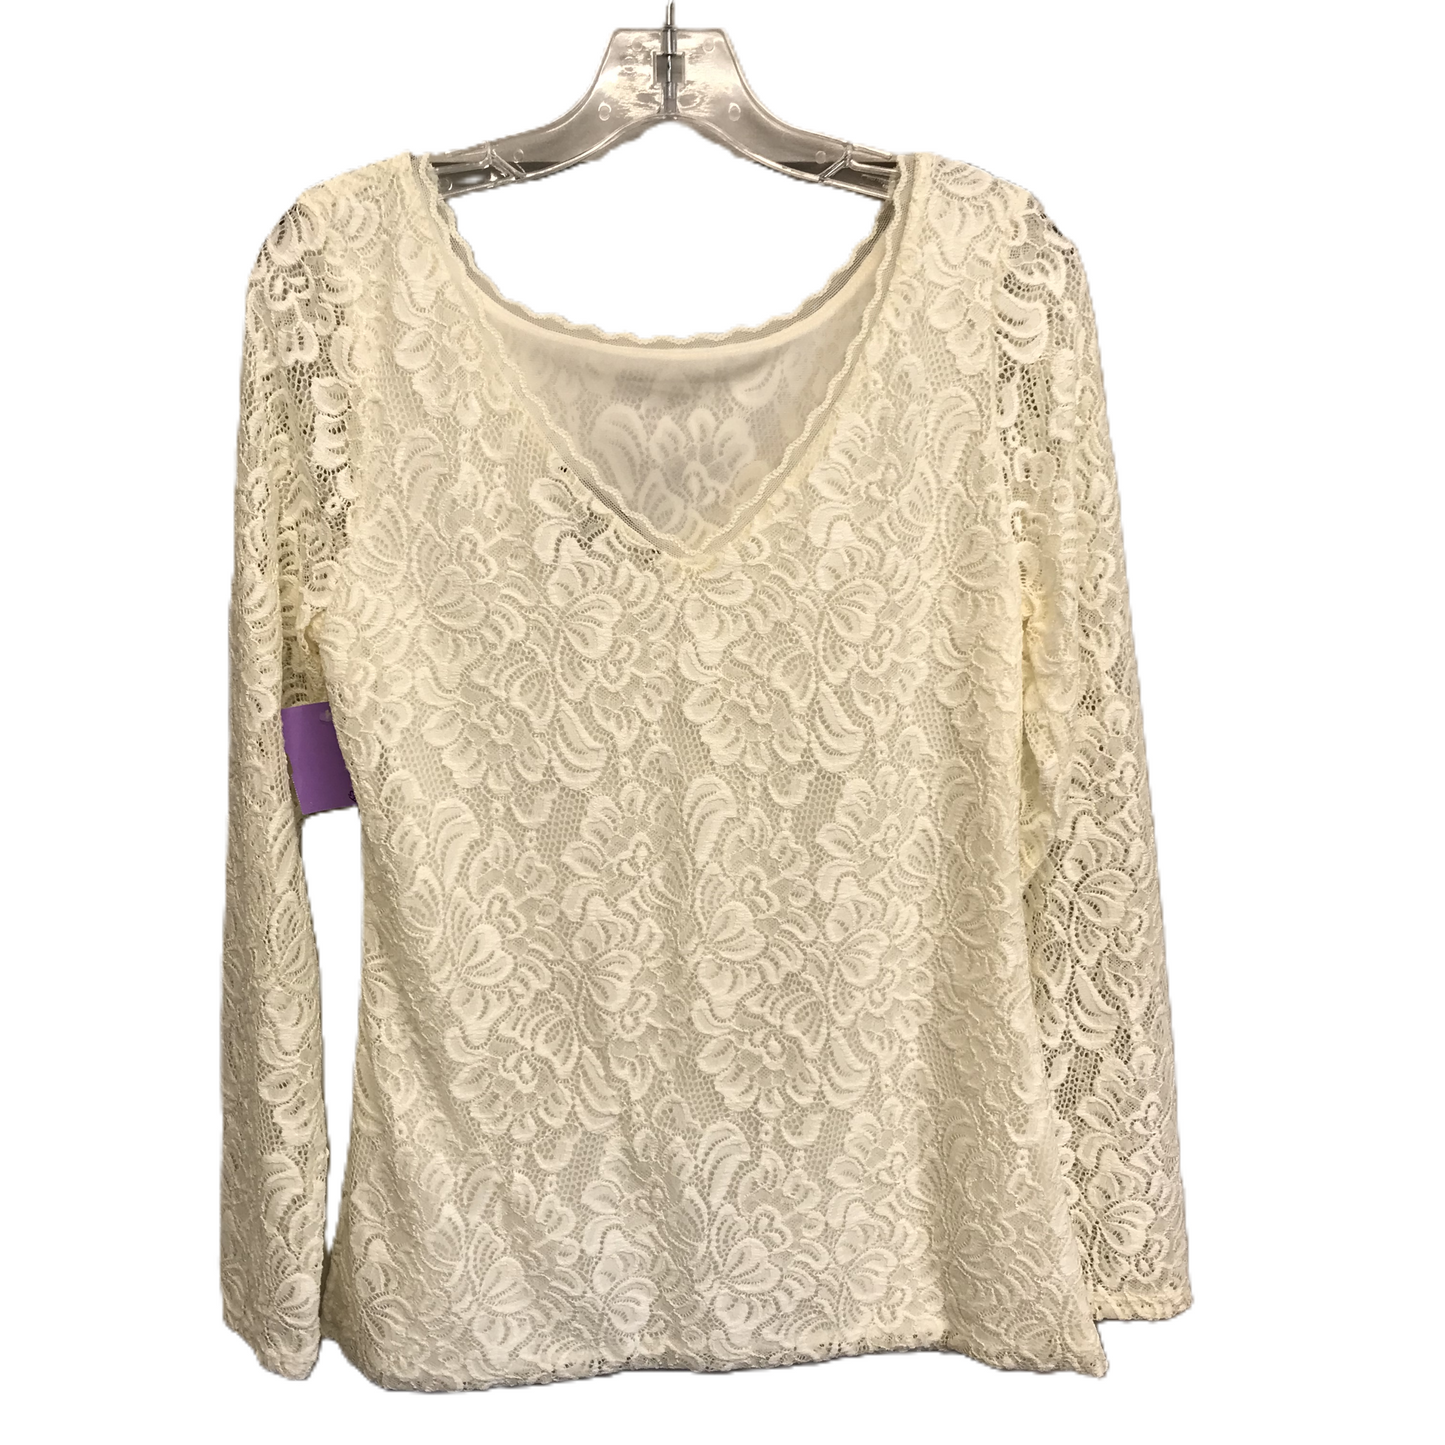 Ivory Top Long Sleeve By White House Black Market, Size: M